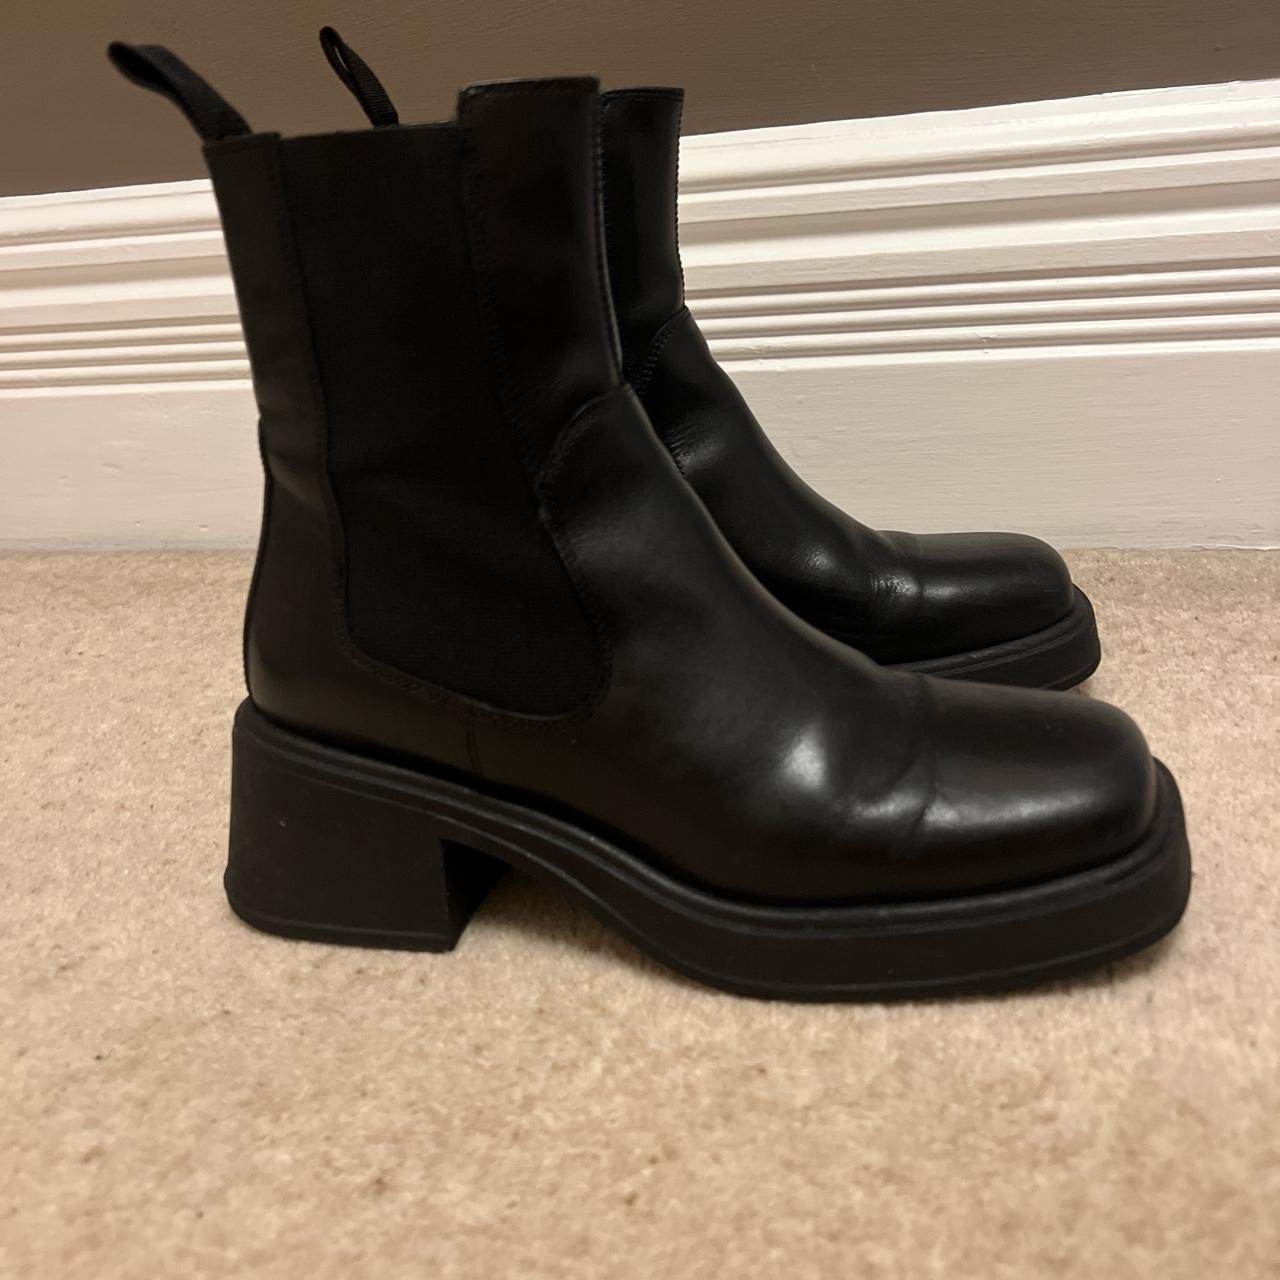 Chunky square toe vagabond boots. Only worn once -... - Depop